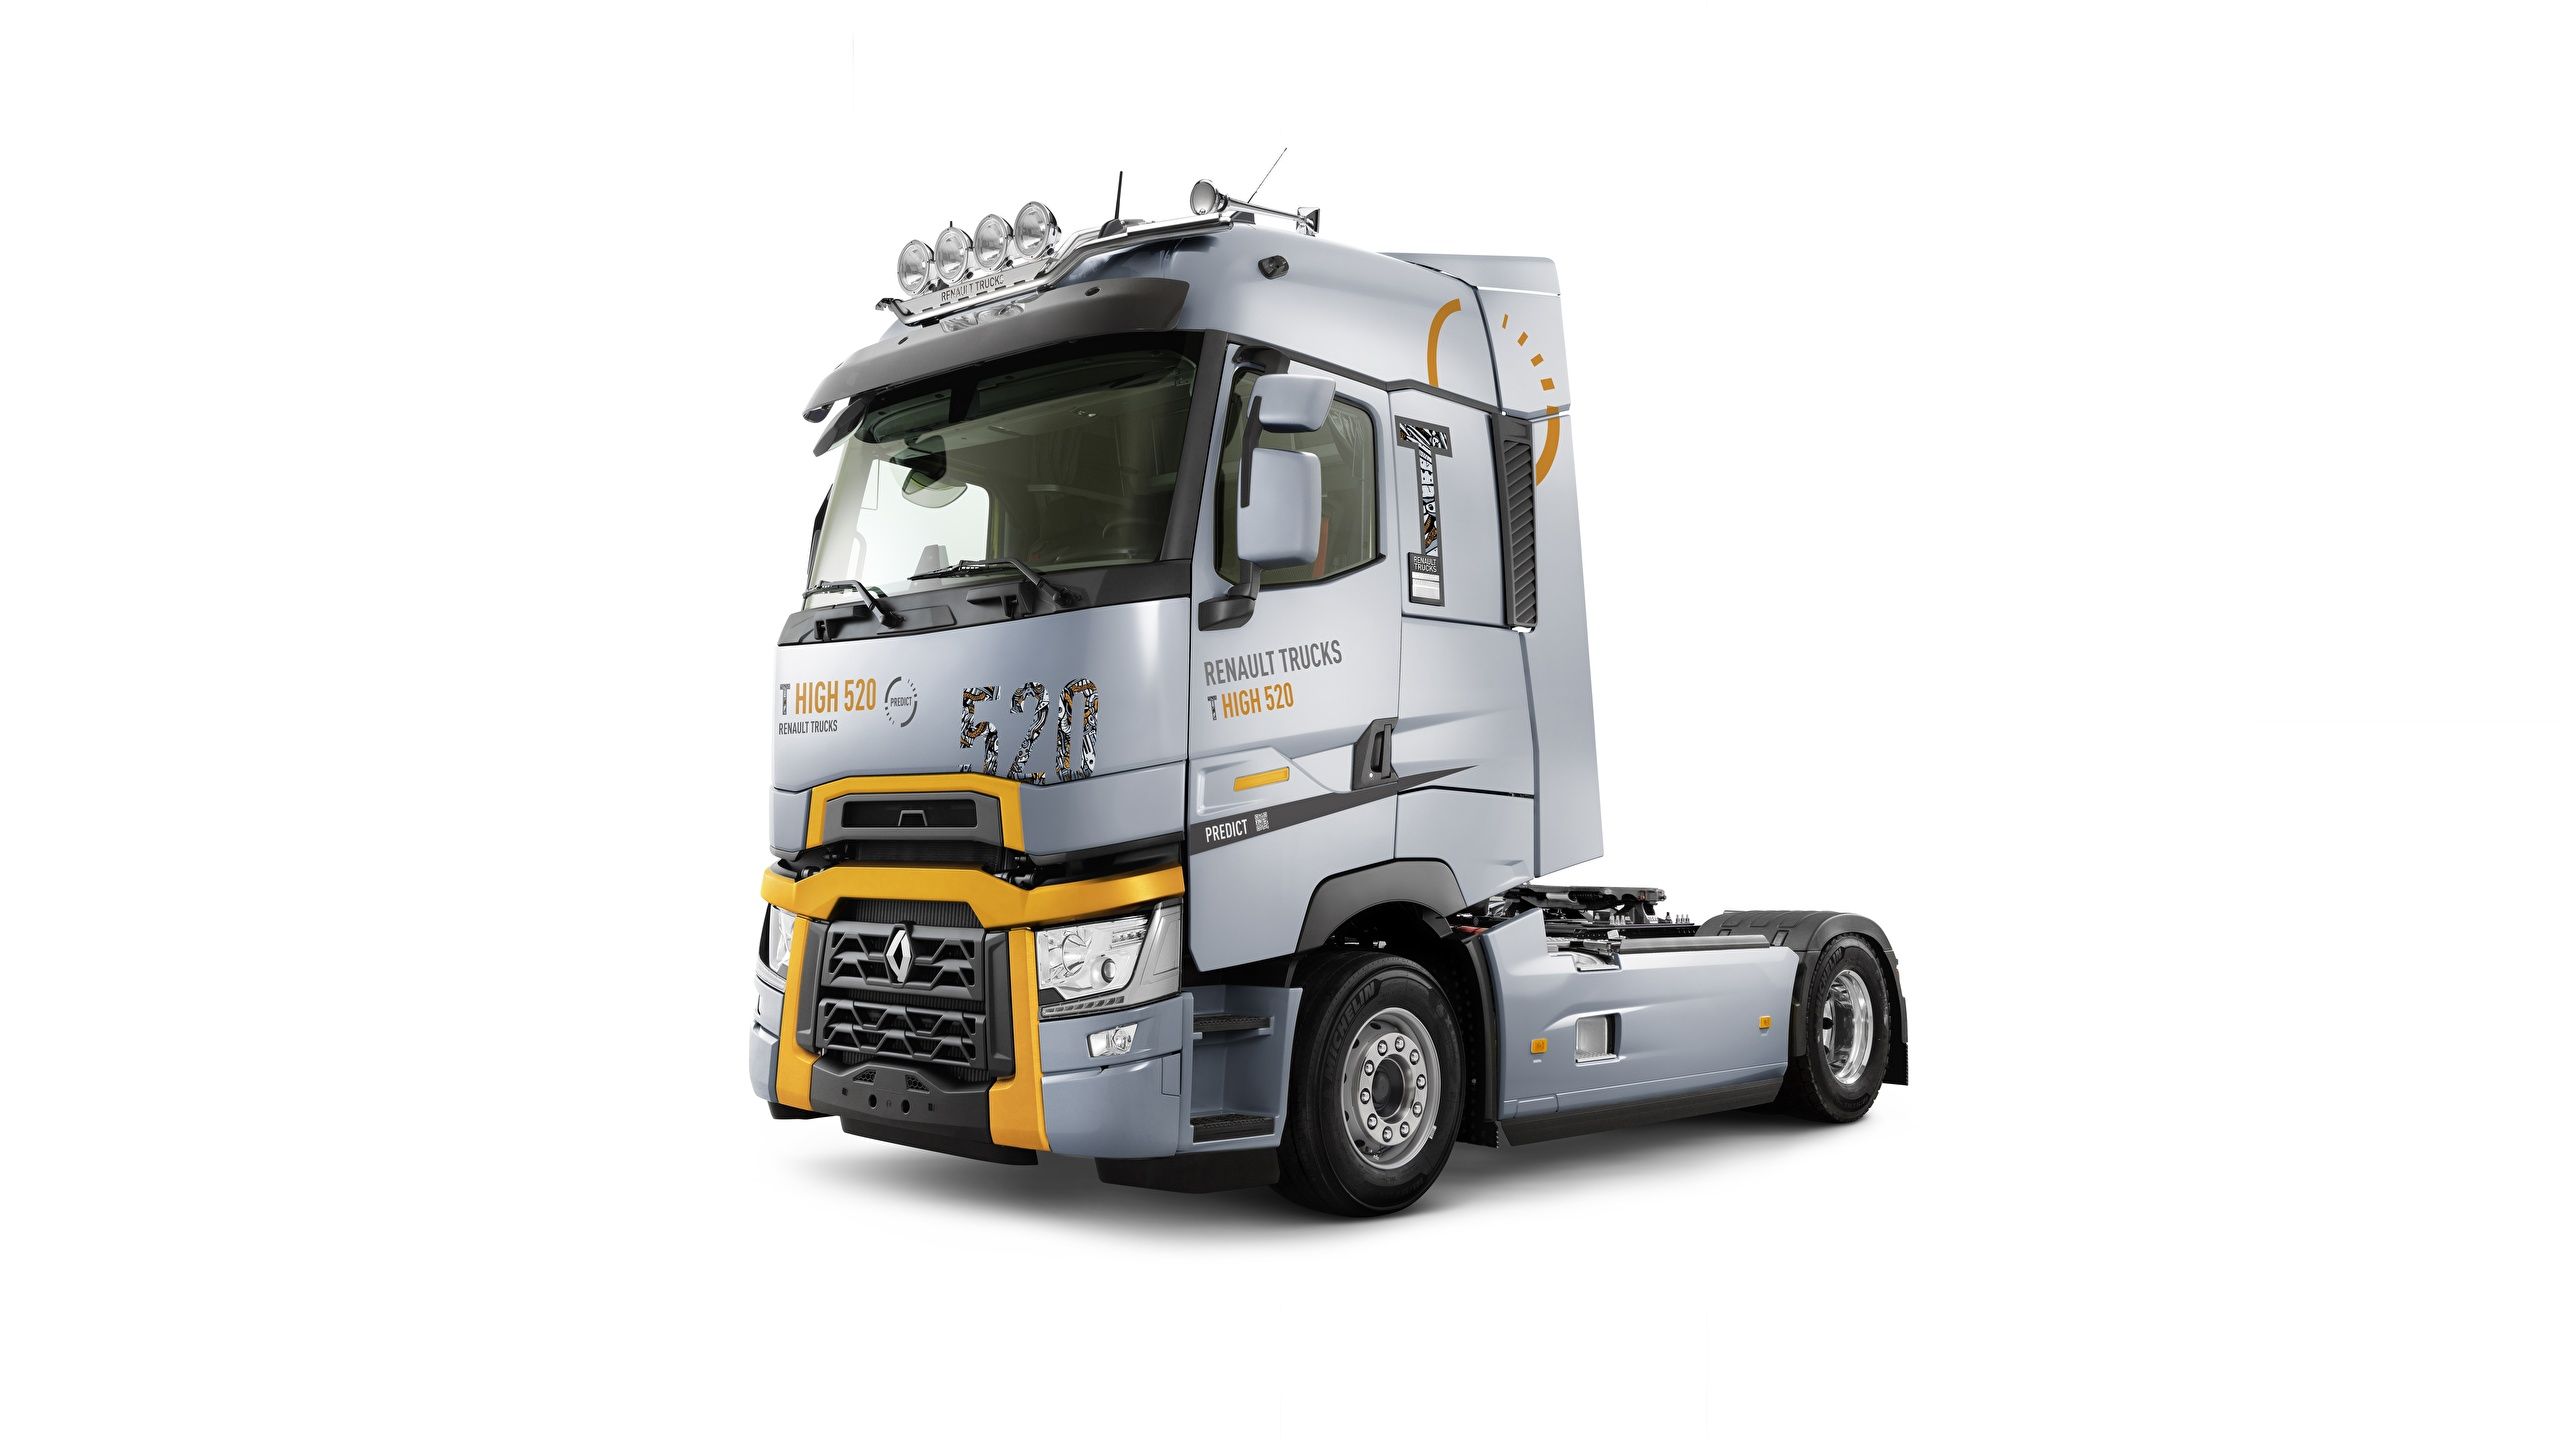 Picture Trucks Renault T High 520 Silver color Cars White 2560x1440